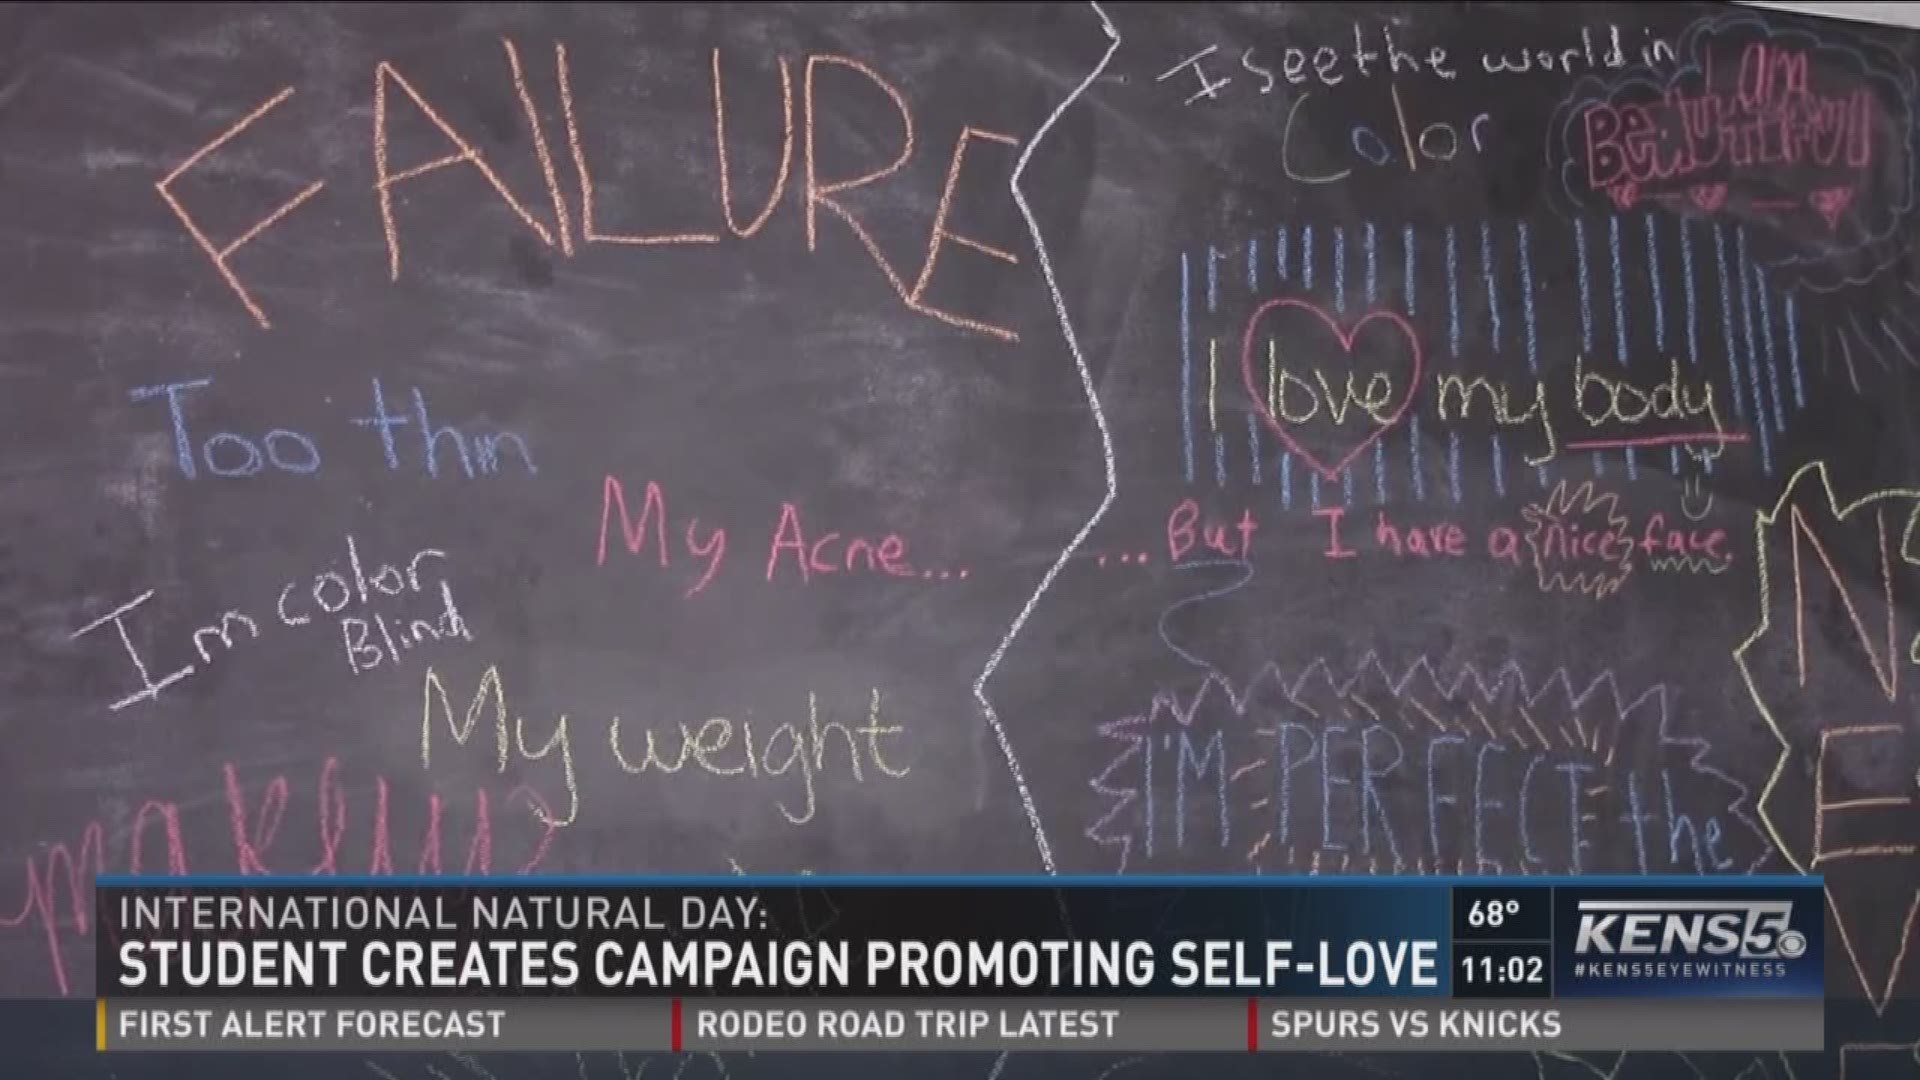 Student creates campaign promoting self-love